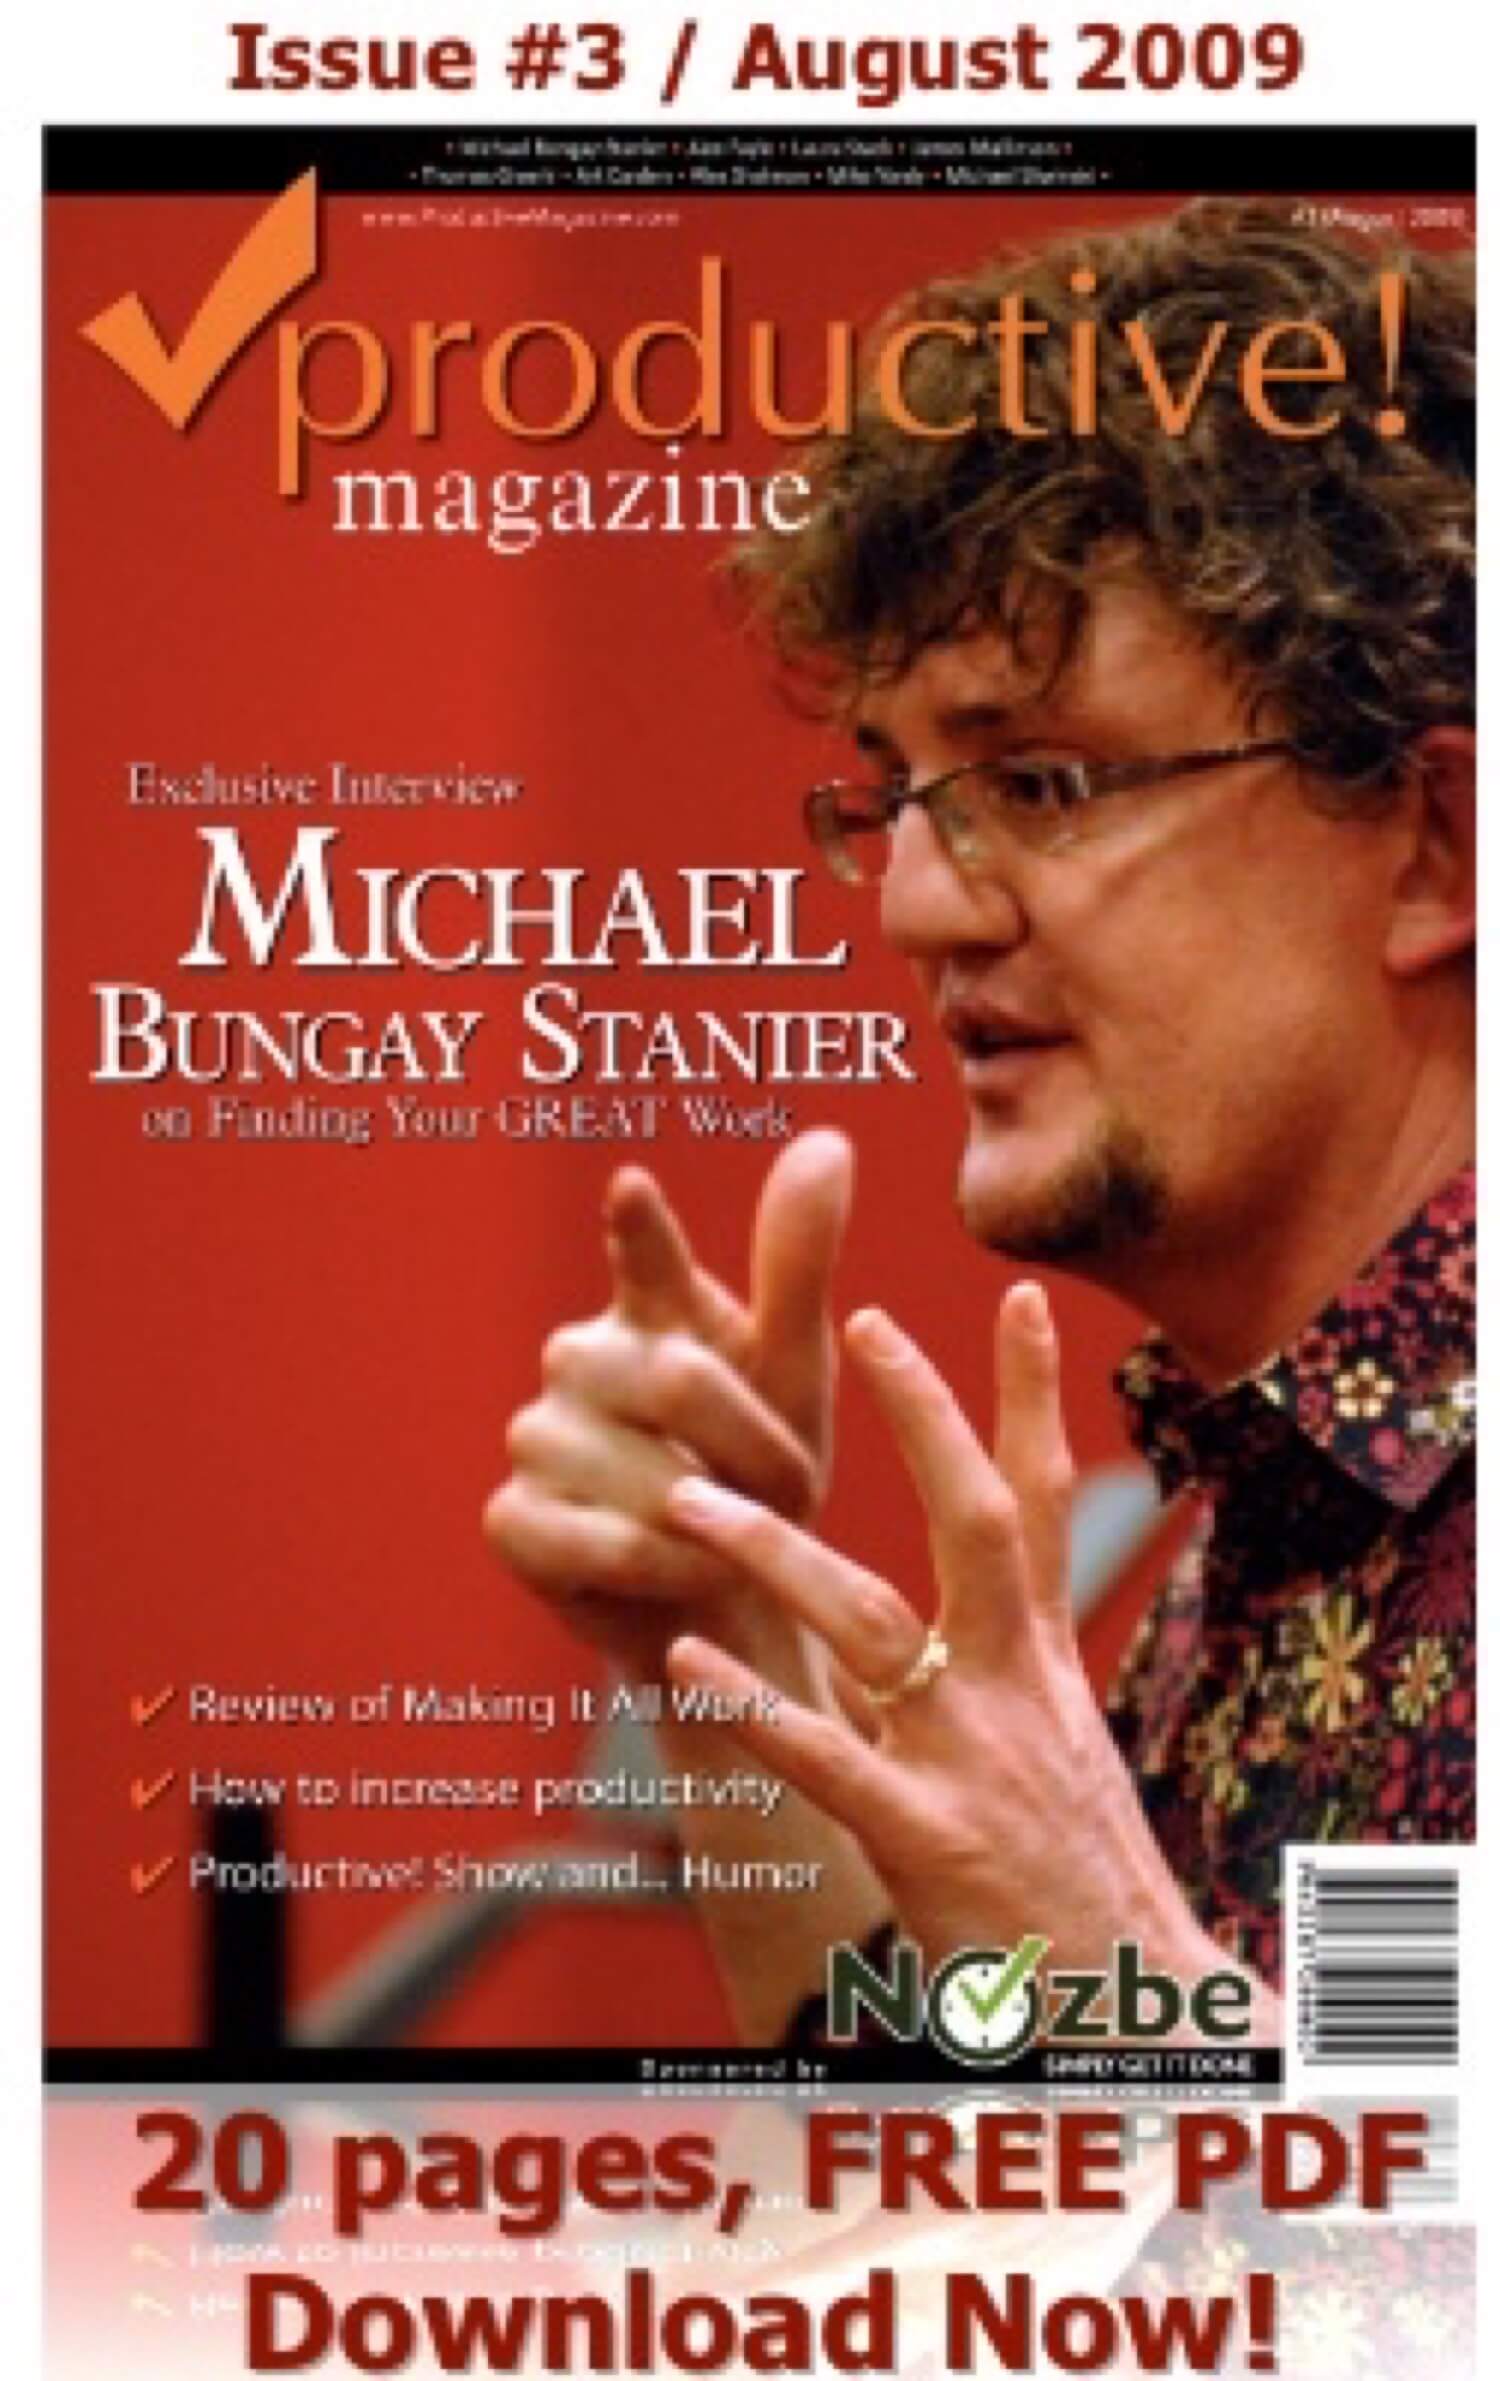 Productive Magazine issue #3 with Michael Bungay Stanier (August 2009